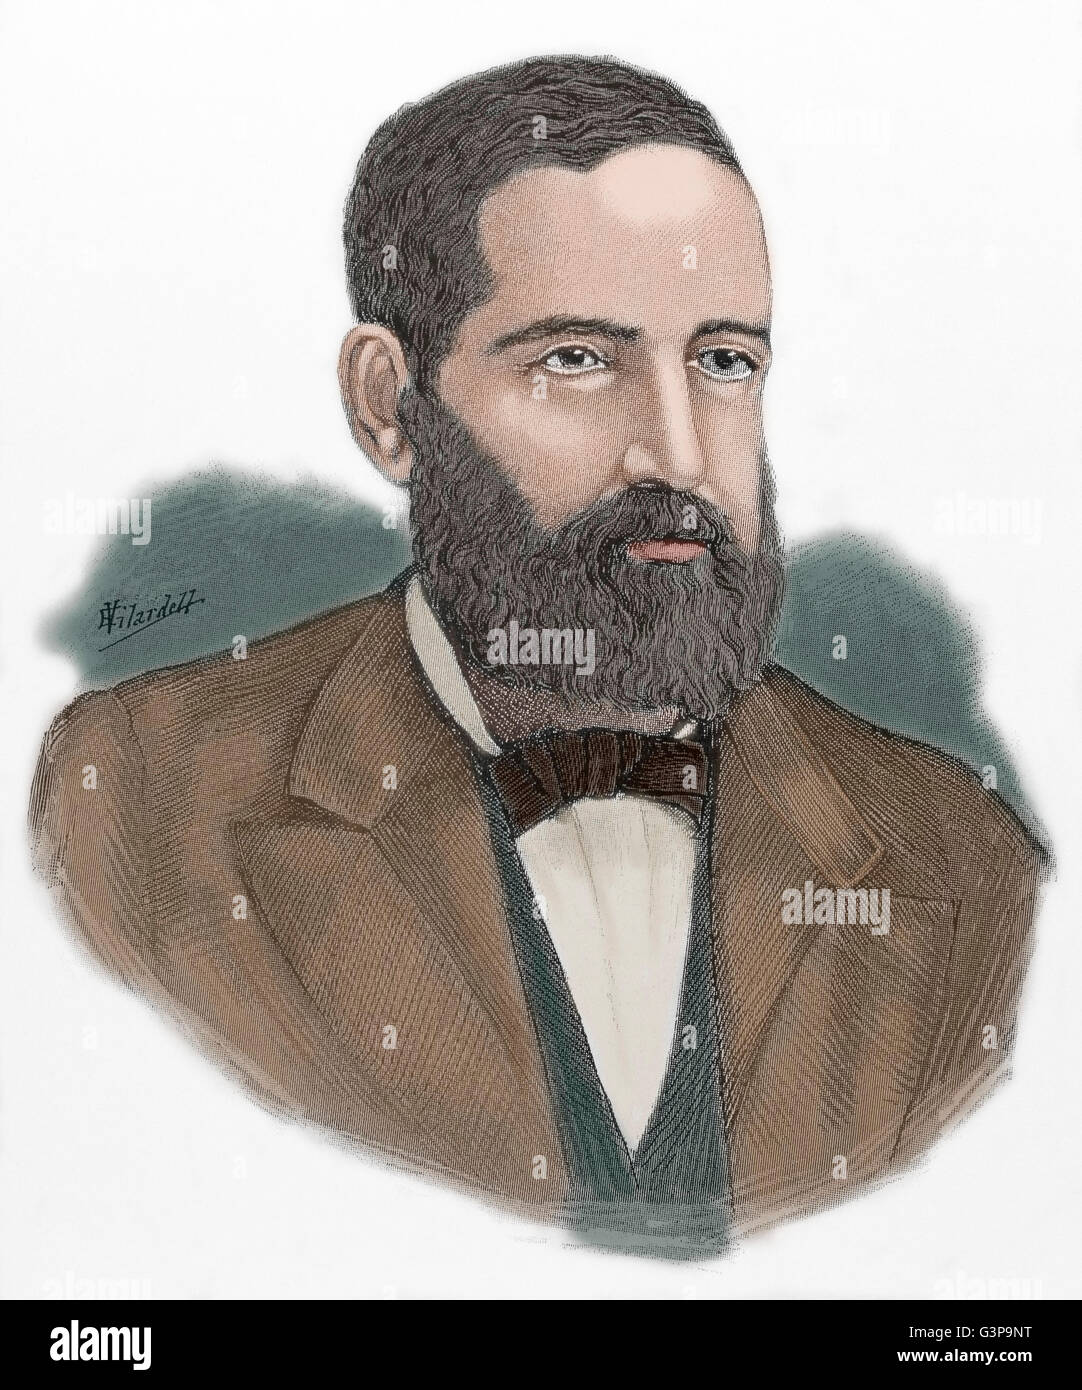 Evaristo Carazo Aranda (1821-1889). President of Nicaragua (1887-1889). Member of the Conservative Party of Nicaragua. Portrait. Engraving at 'Americanos celebres', 1888. Colored. Stock Photo